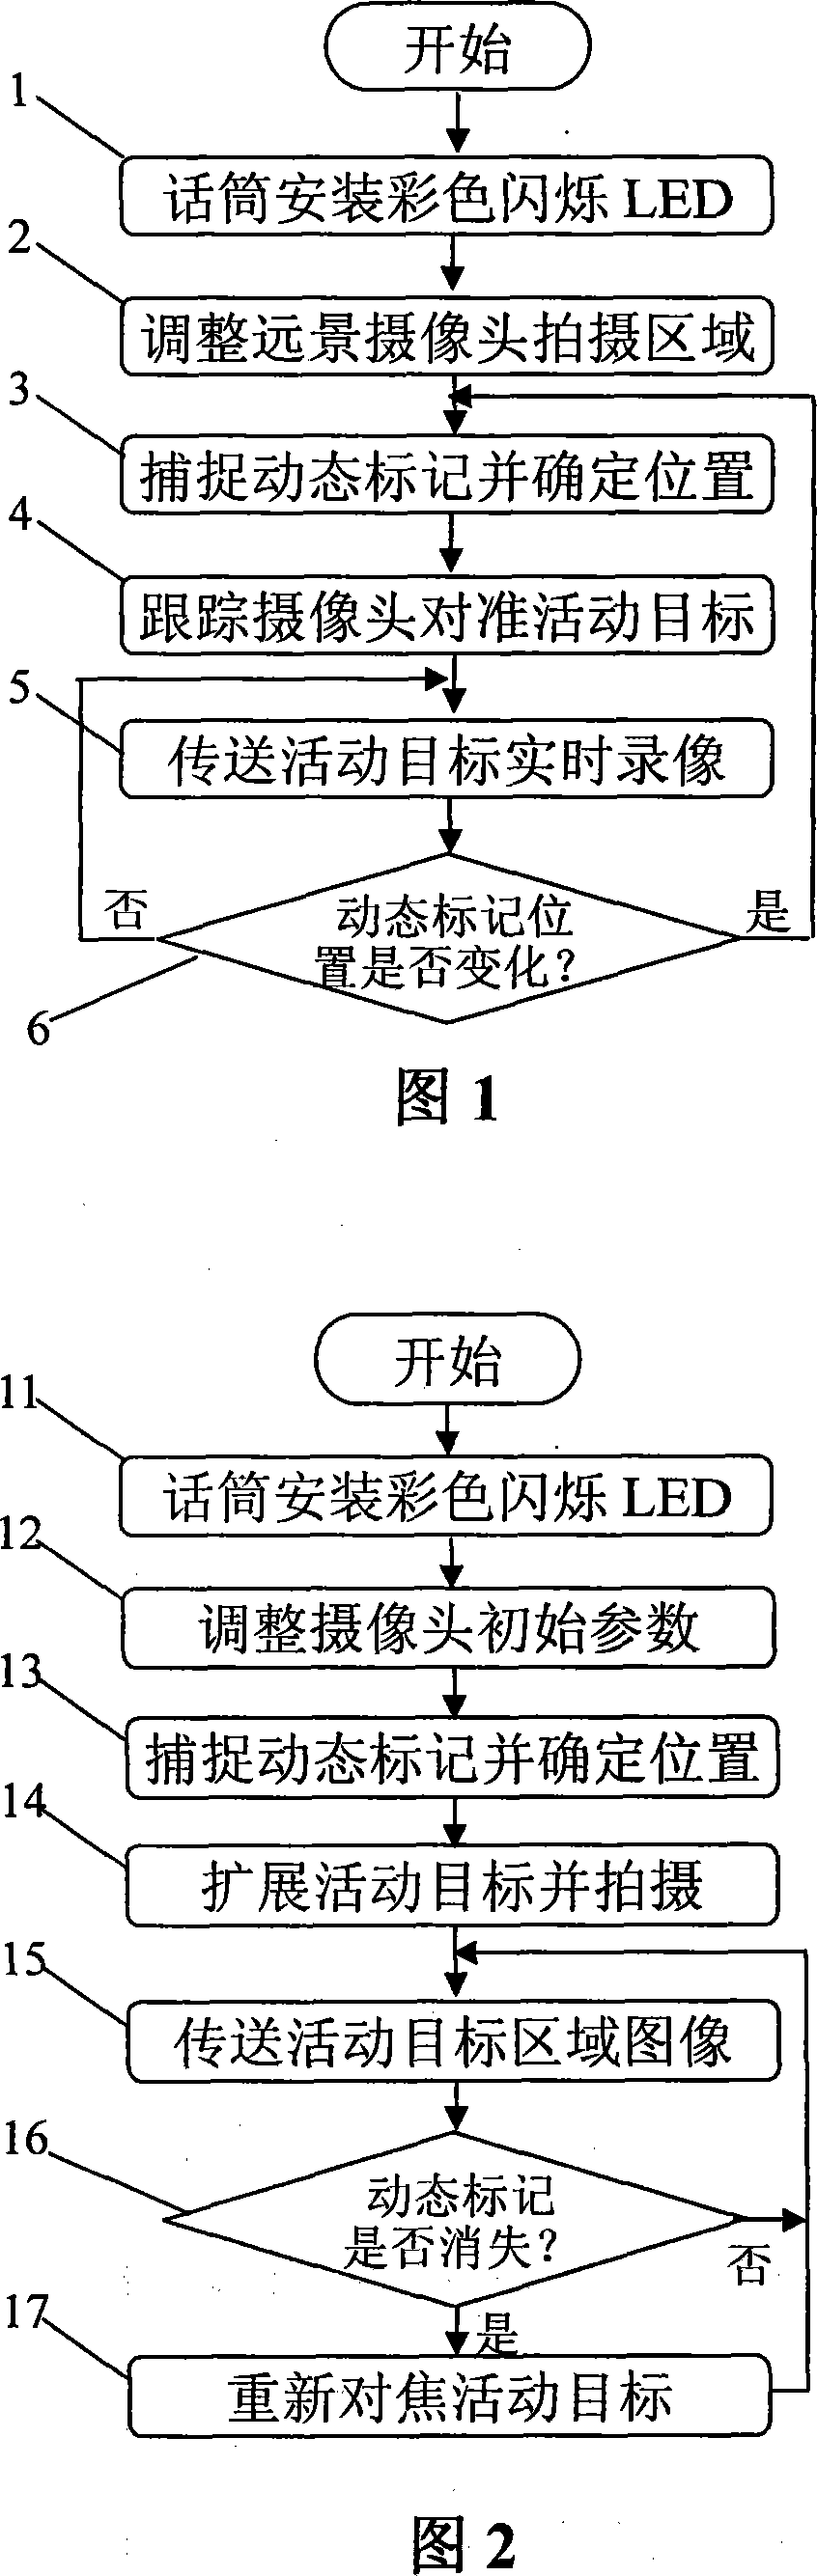 Automatic mobile target tracking and shooting method